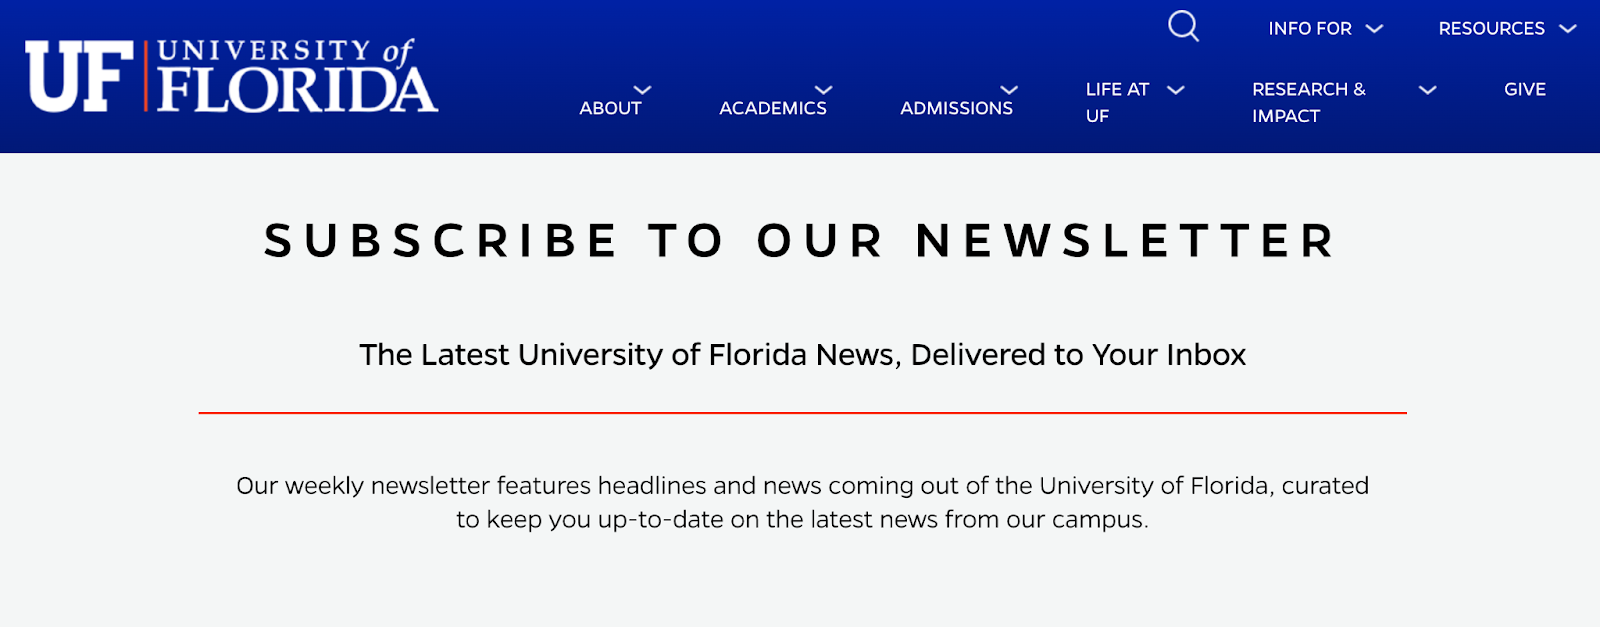 University of Florida offers a subscription